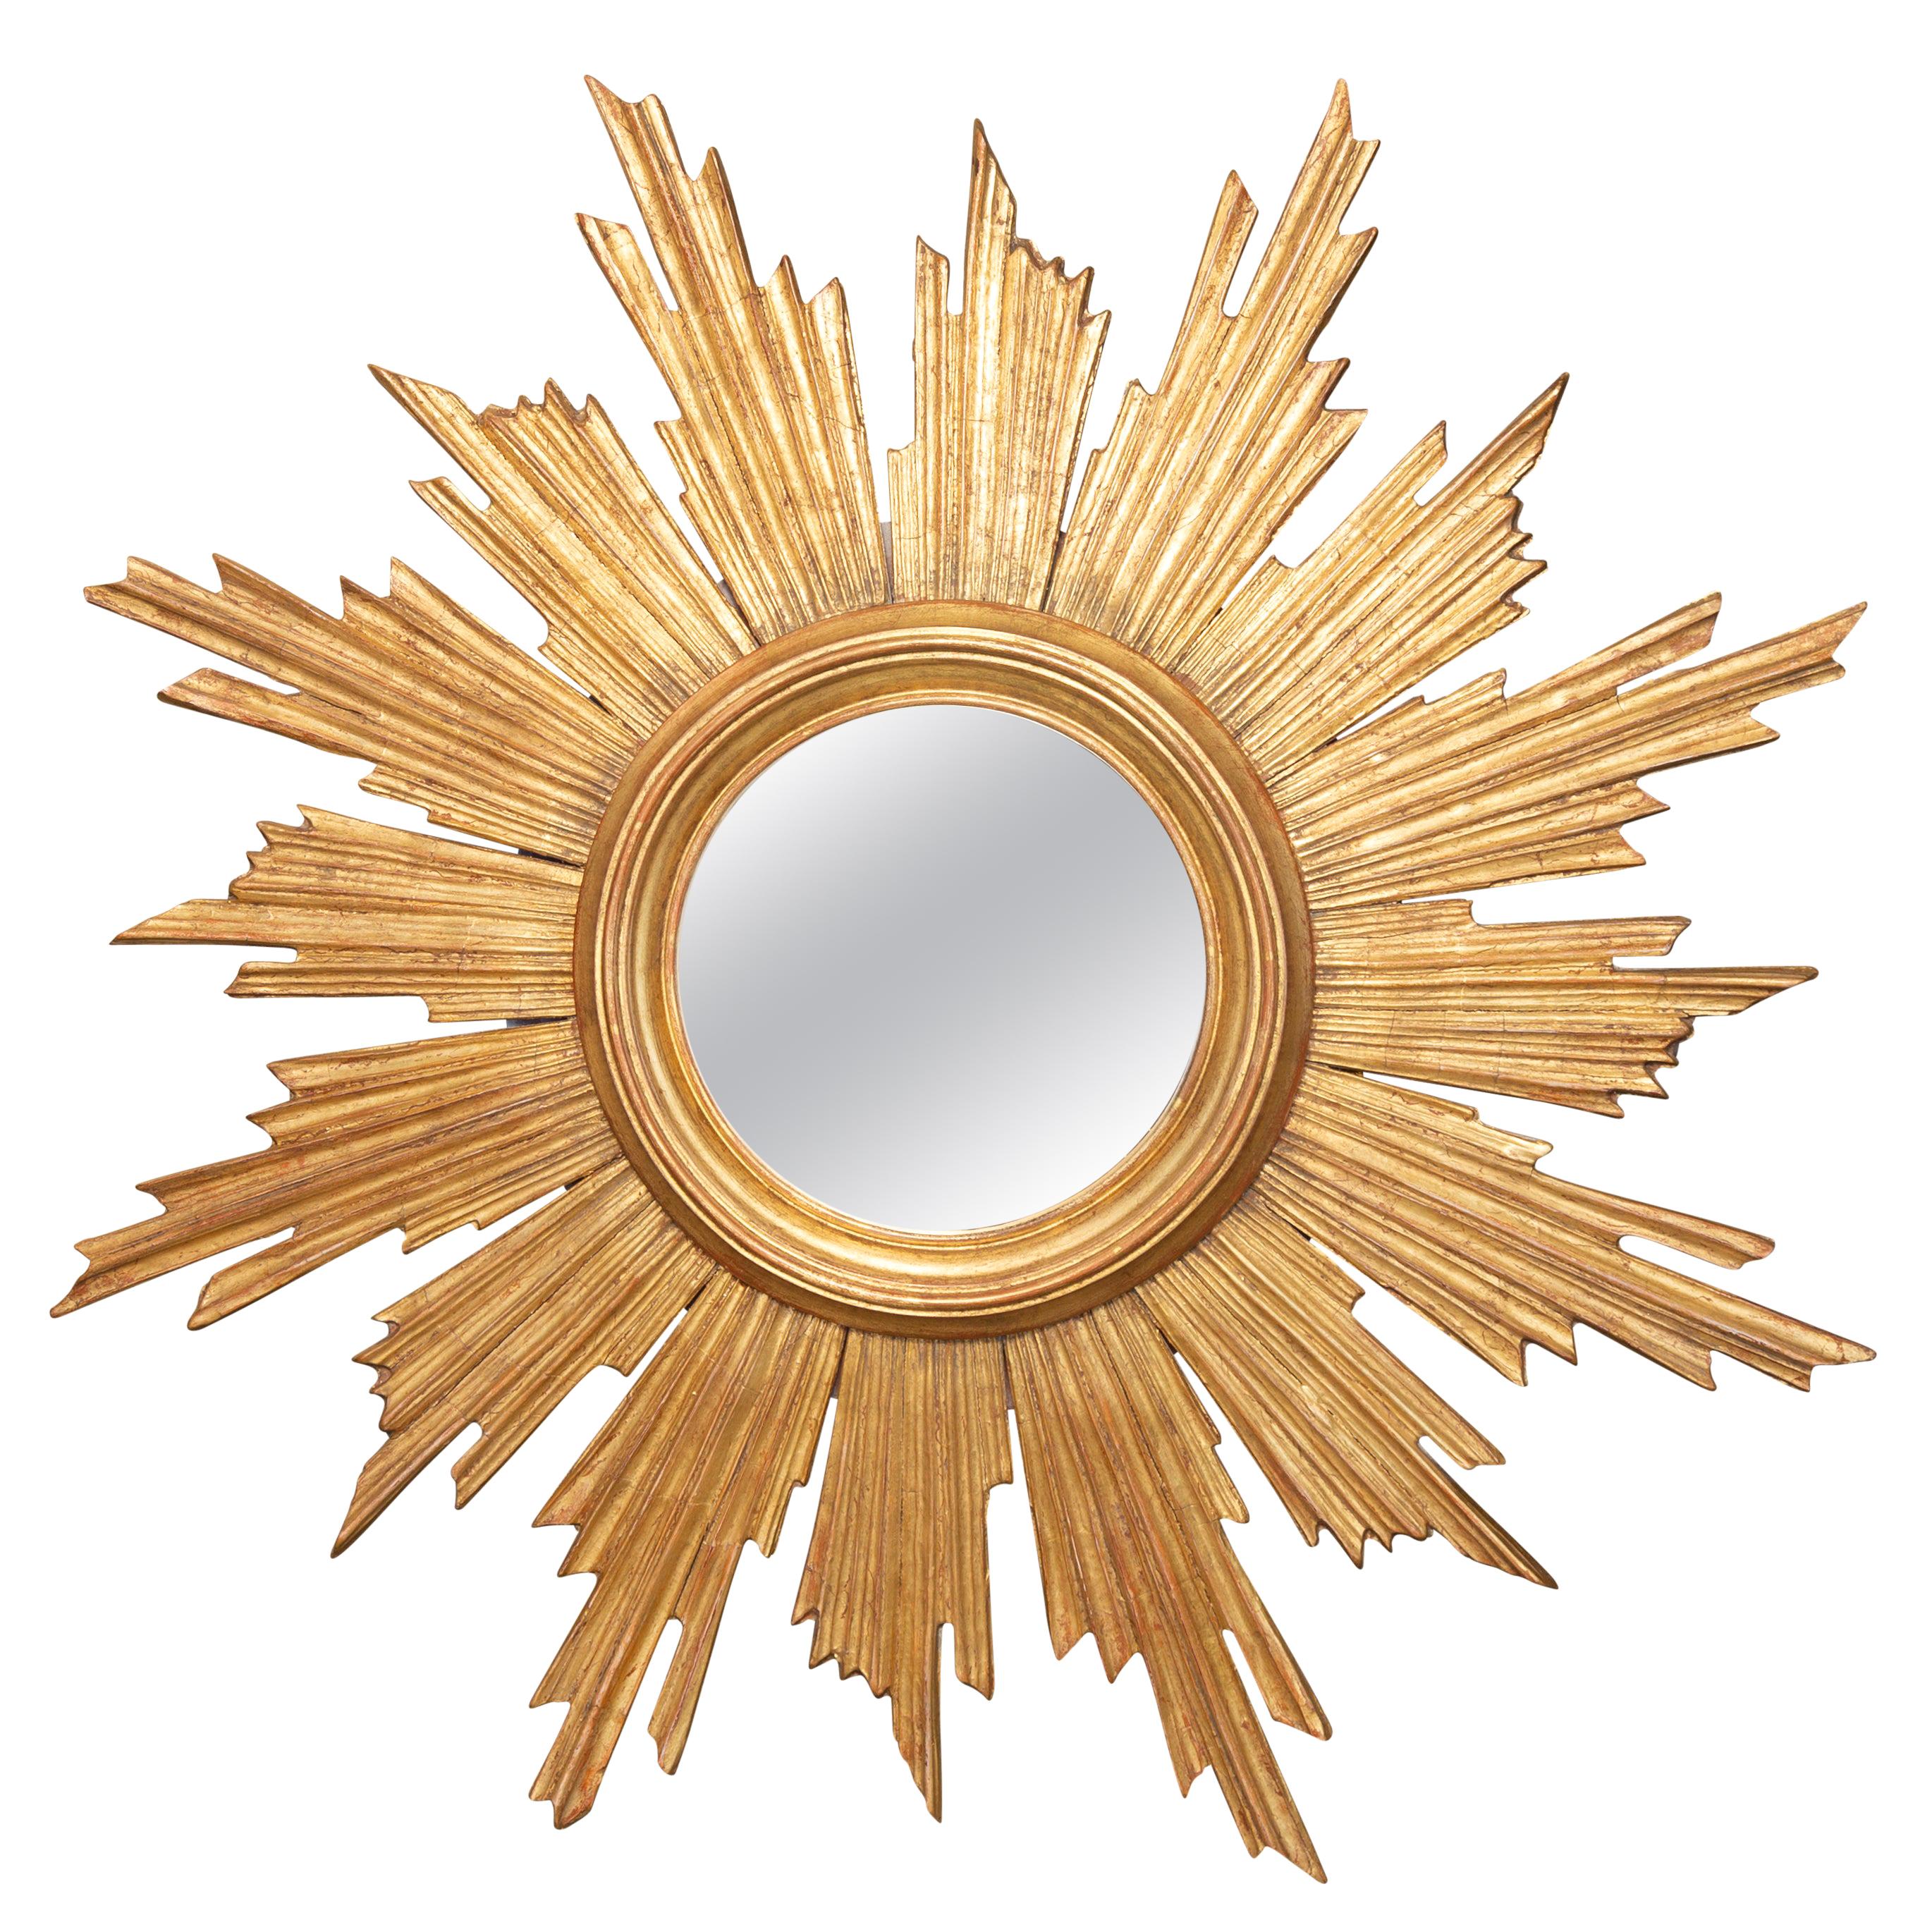 Vintage French Carved Midcentury Giltwood Sunburst with Convex Mirror